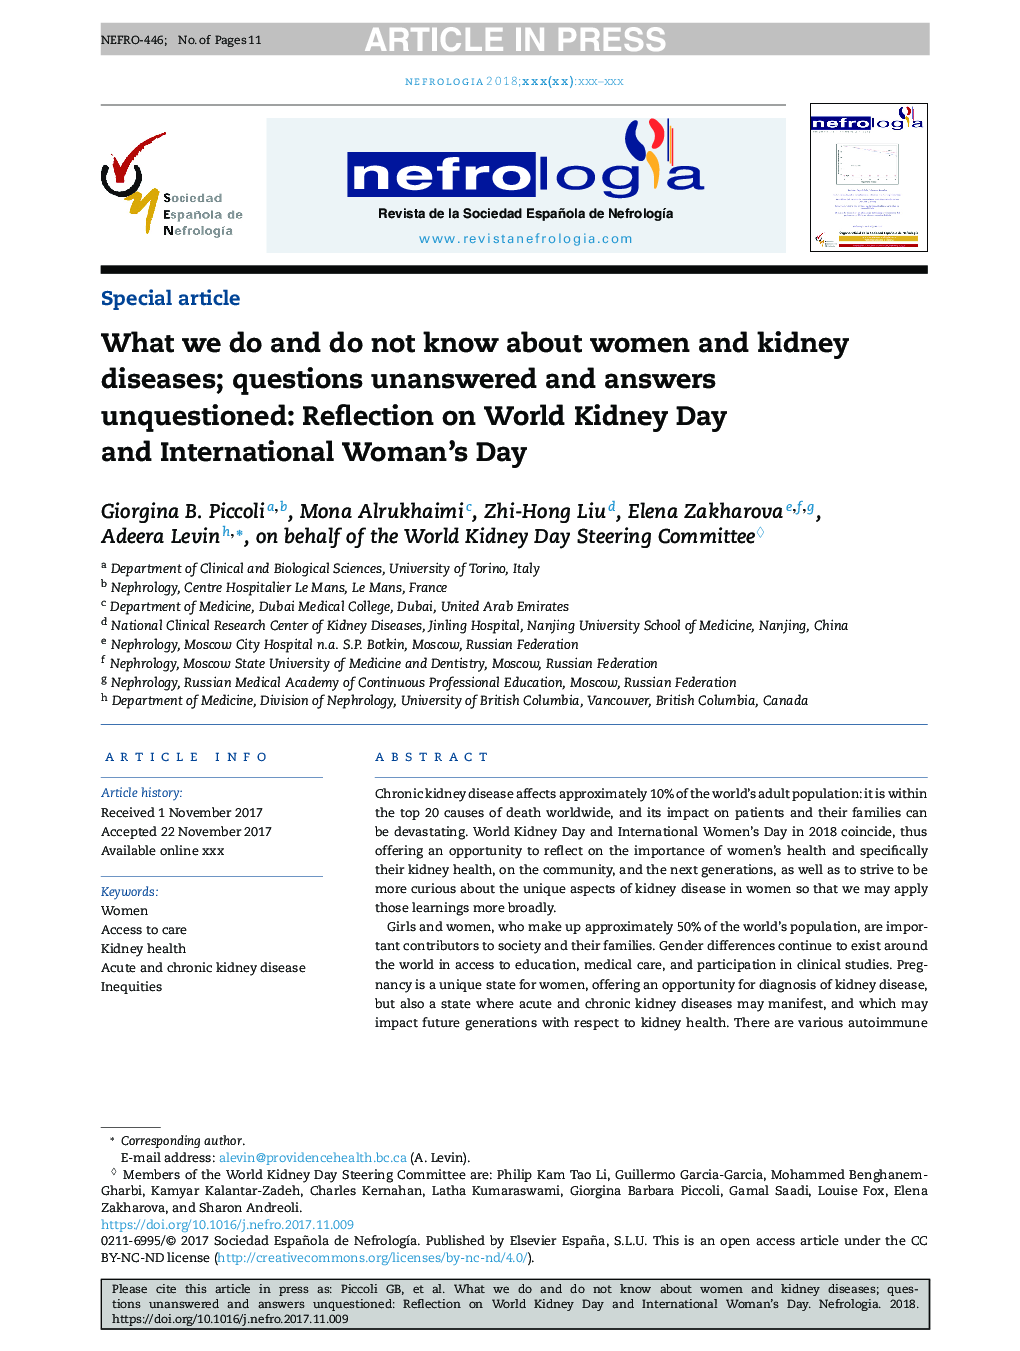 What we do and do not know about women and kidney diseases; questions unanswered and answers unquestioned: Reflection on World Kidney Day and International Woman's Day